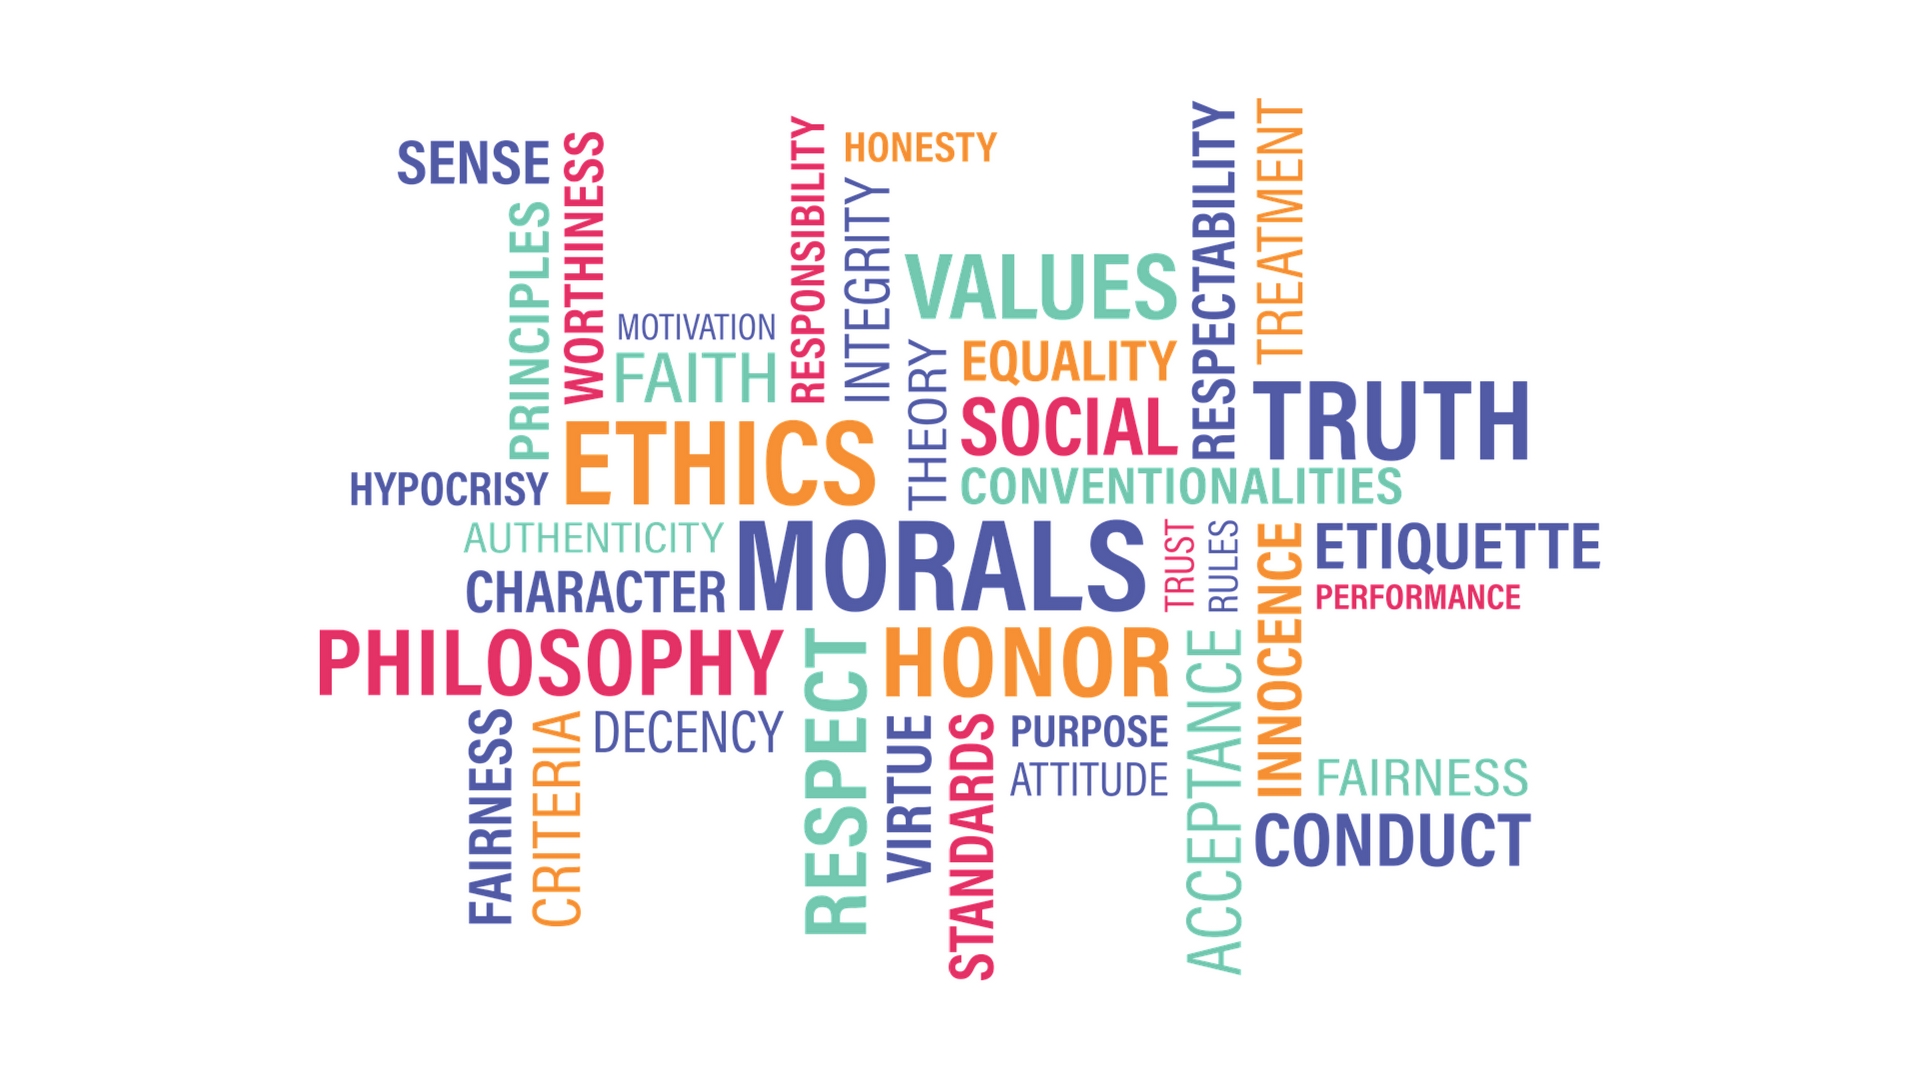 Mission Values and ethics